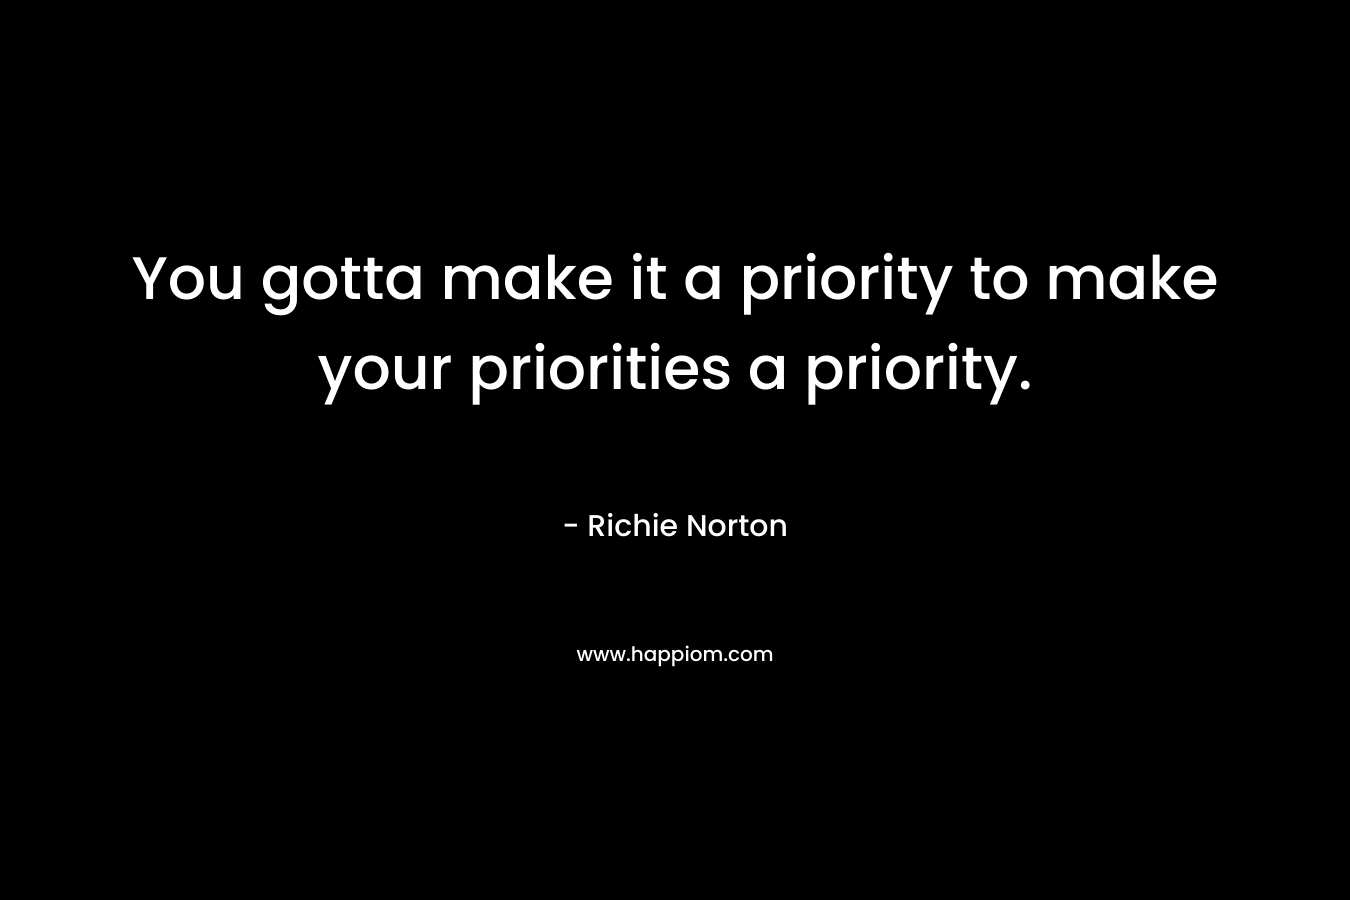 You gotta make it a priority to make your priorities a priority.